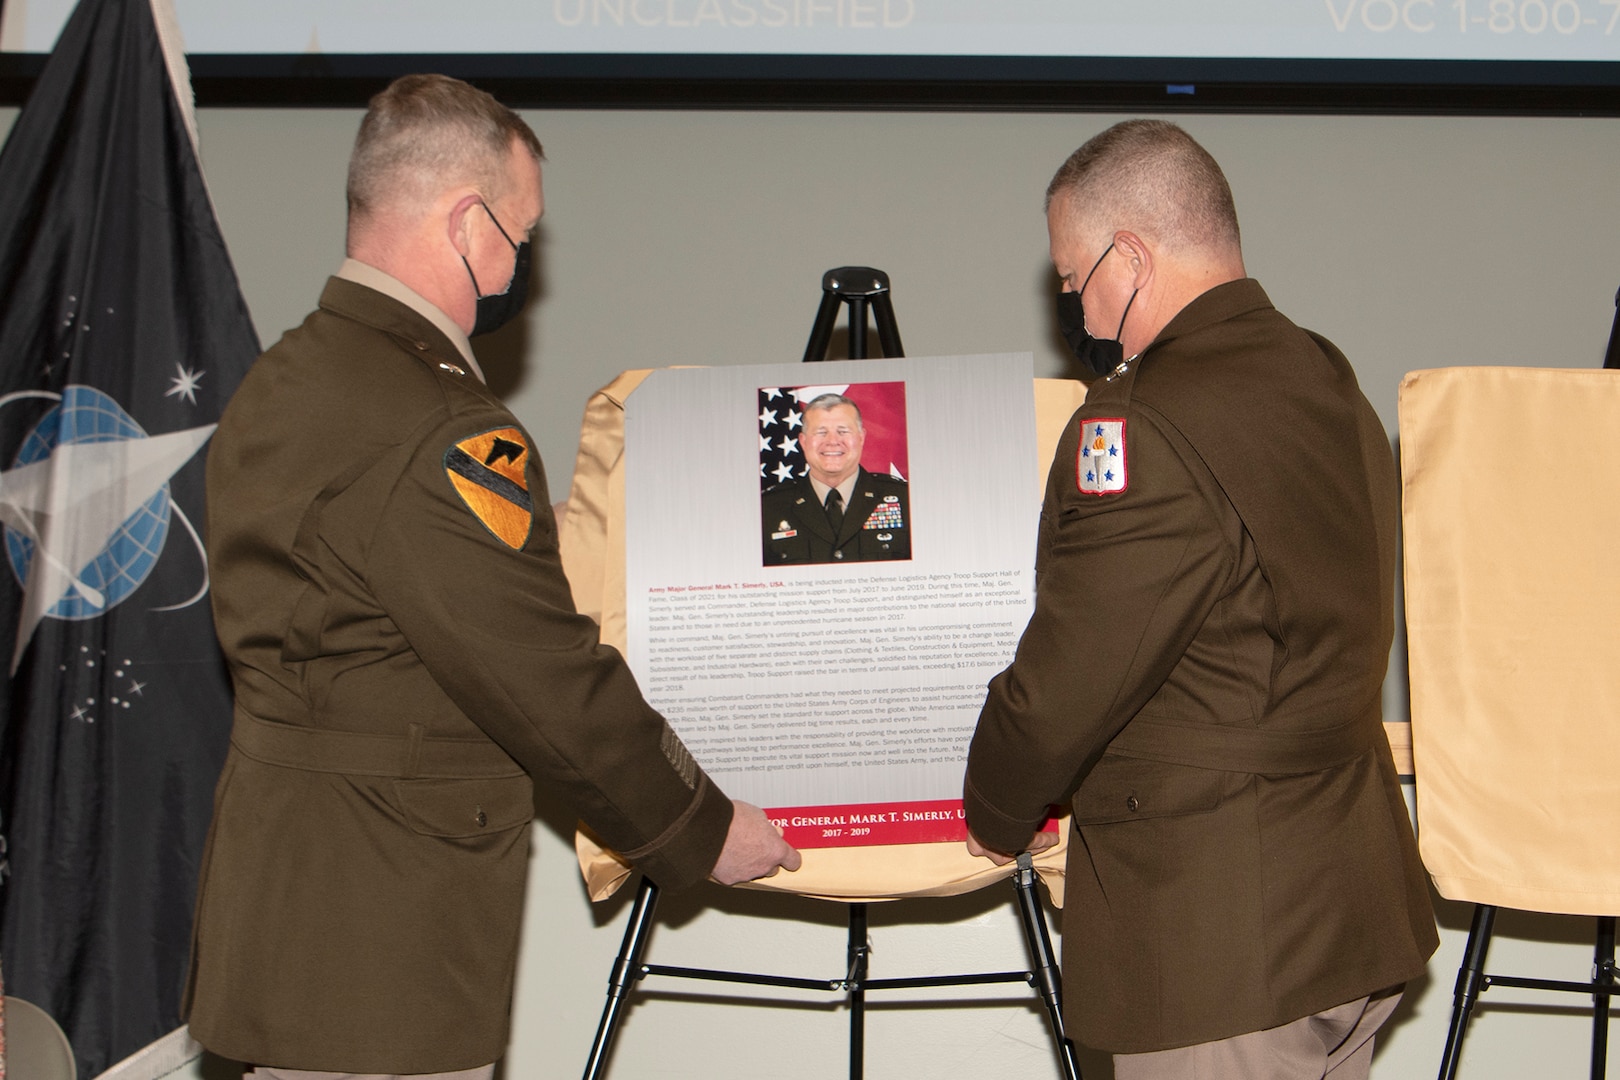 two Army generals unveil plaque on stage